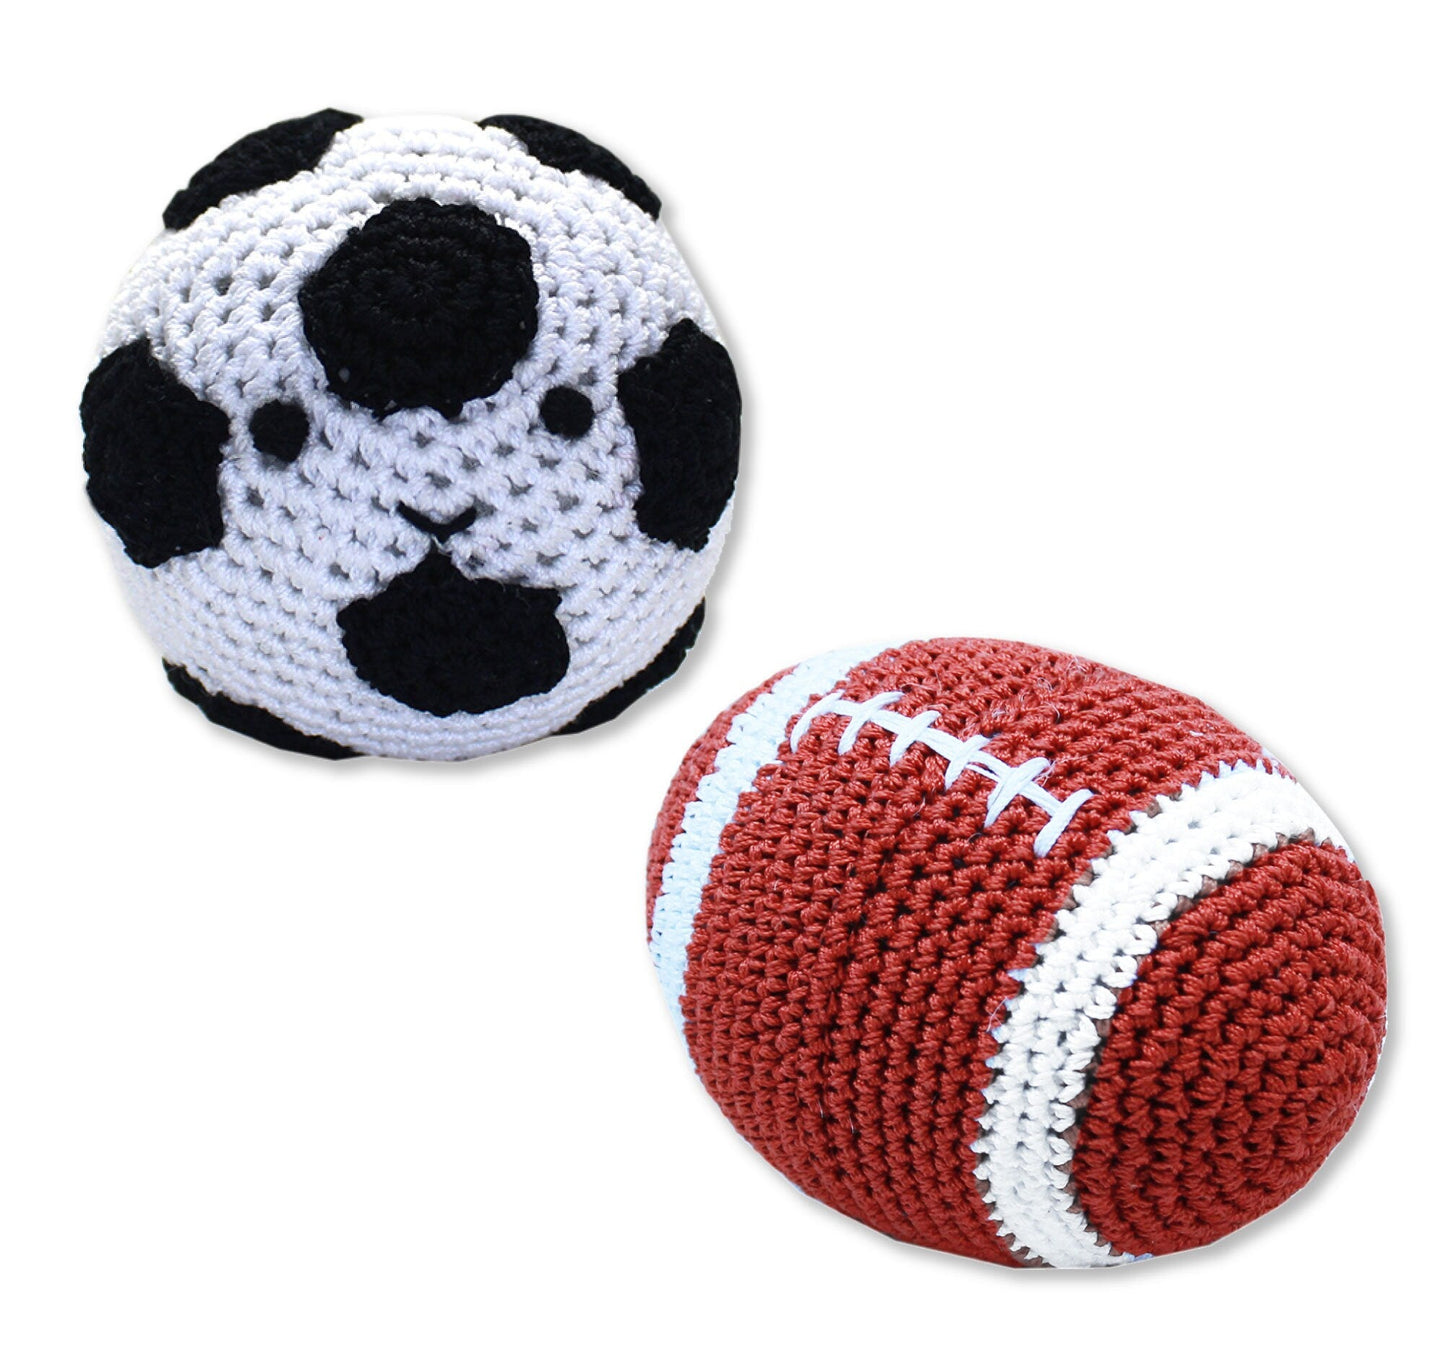 Knit Knacks Organic Cotton Pet & Dog Toys, "Sports Group" (Choose from Soccer or Football)-0